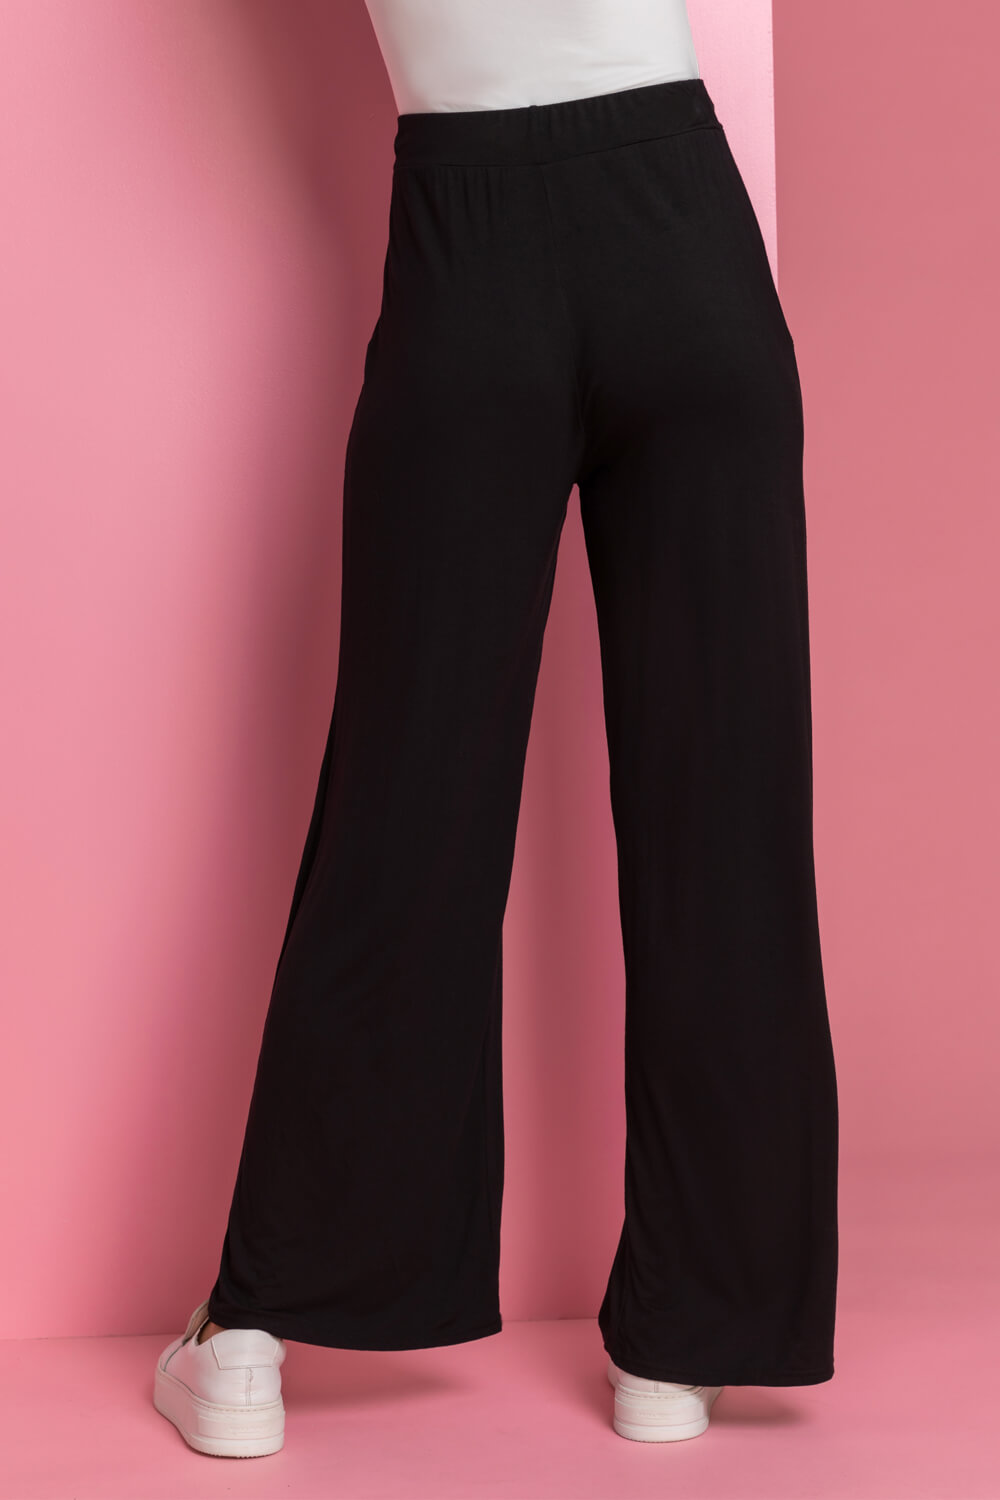 Black Stretch Wide Leg Jersey Trousers, Image 2 of 5